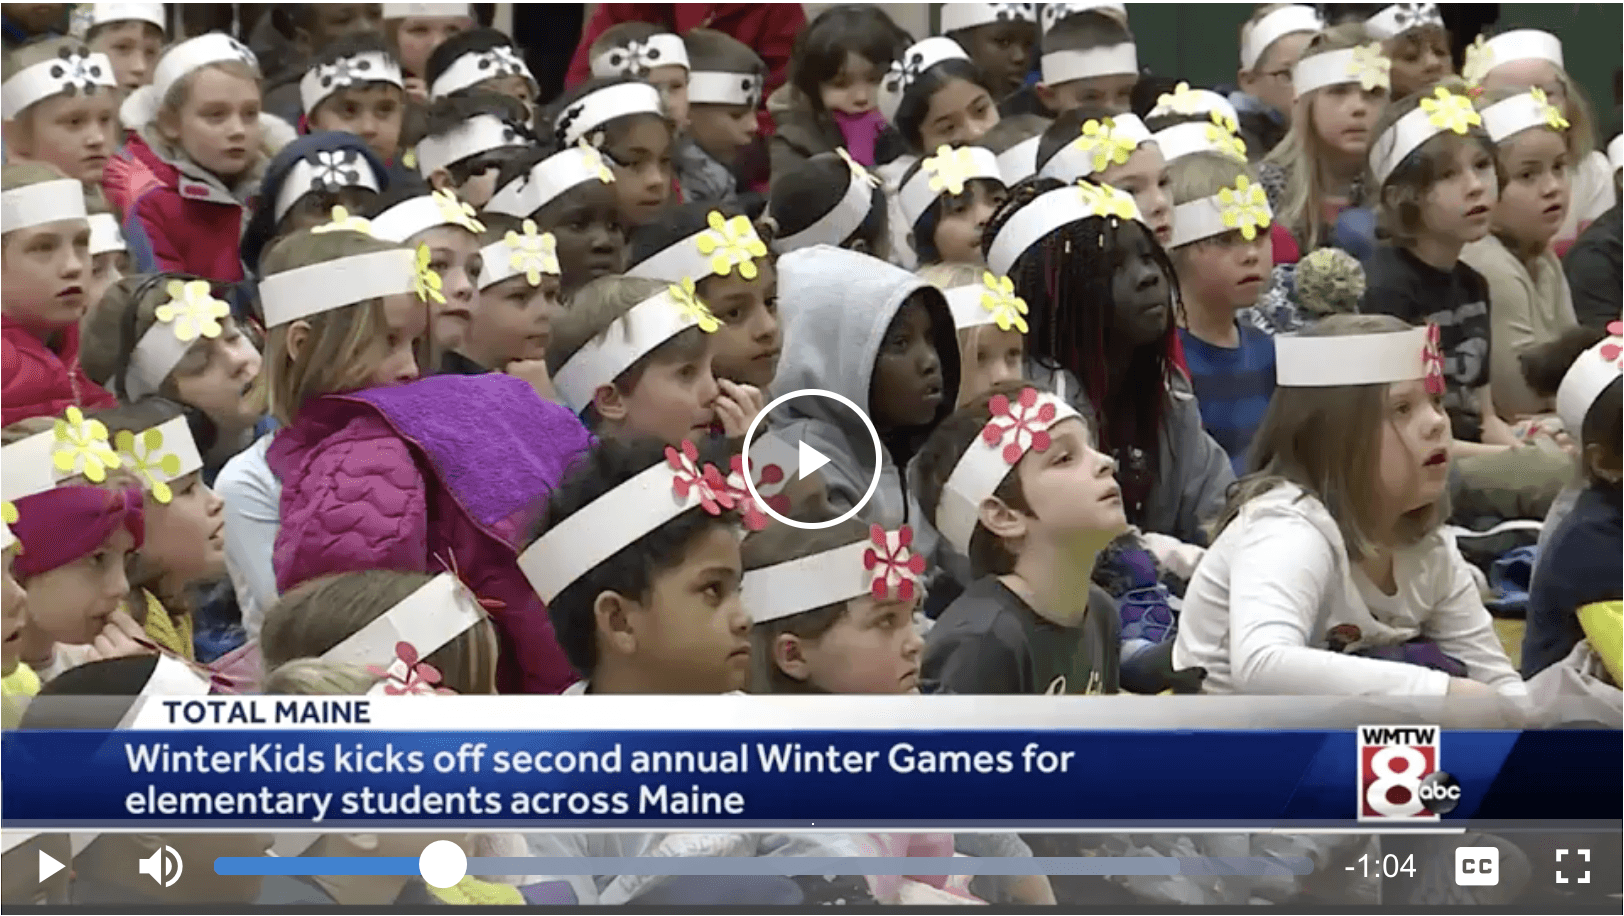 WMTW Coverage of Winter Games 2019 Opening Ceremony